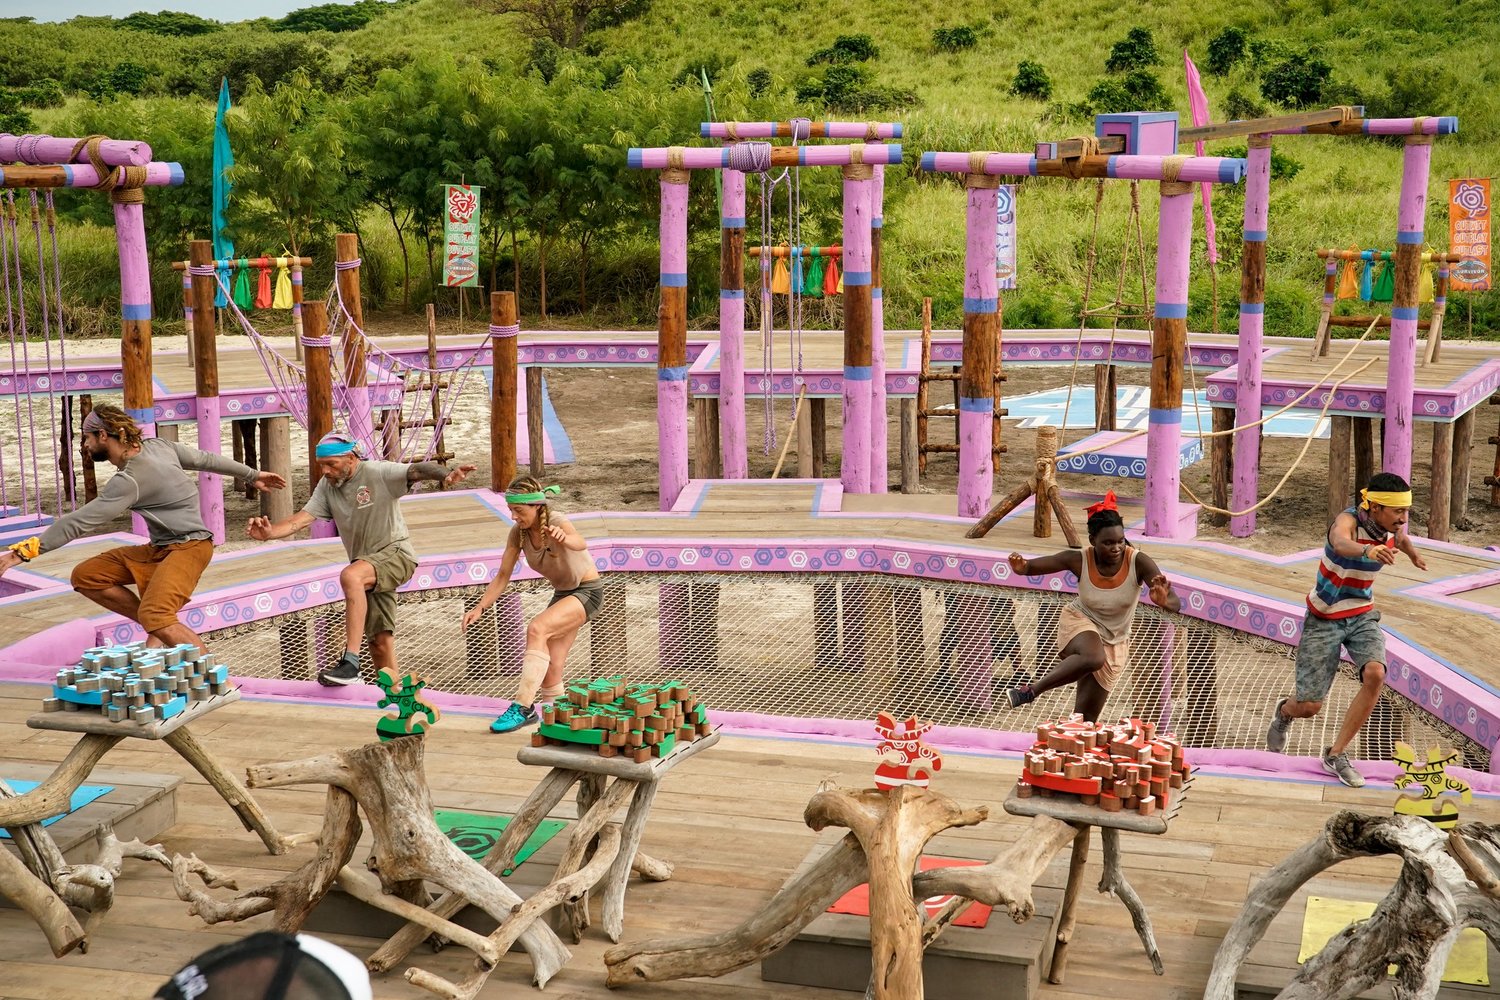 The first immunity challenge of the "Survivor" season 42 three-hour finale was a physically demanding obstacle course and puzzle challenge.